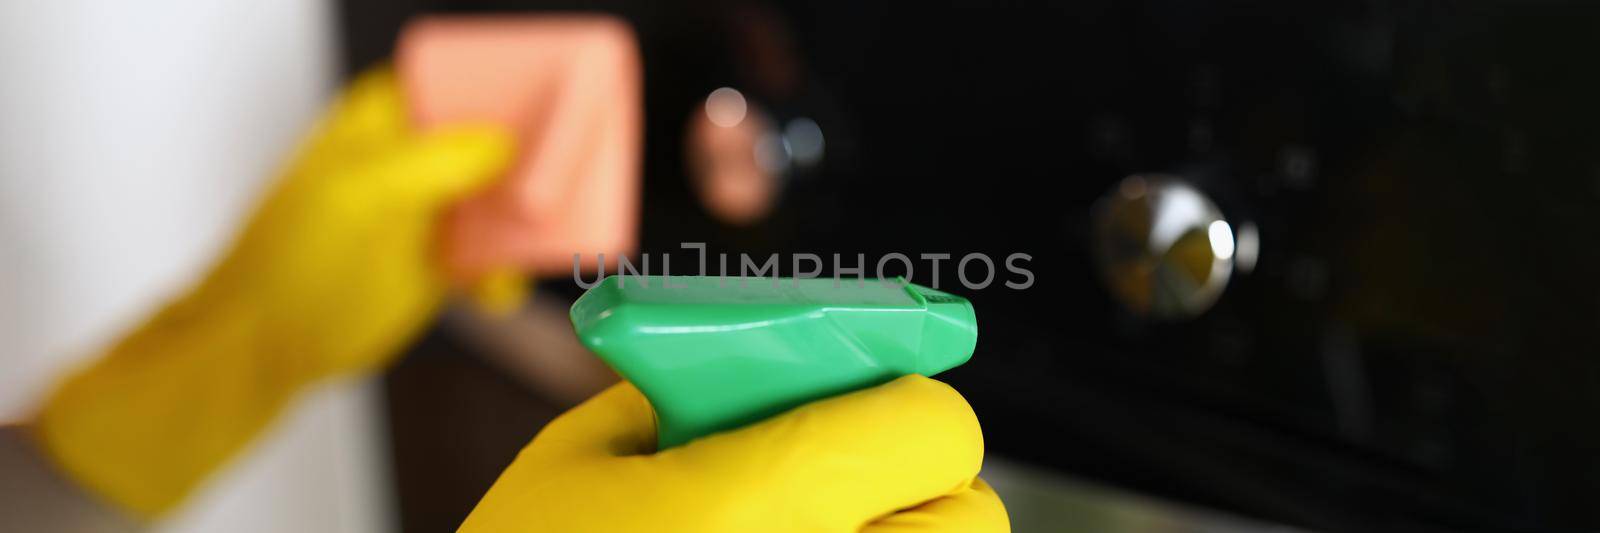 Close-up of woman housekeeper wiping dust from oven using spray and fabric, keep surface clean and shiny at home. Cleaning service job, cleanup, sanitizing, clean space concept. Blurred background